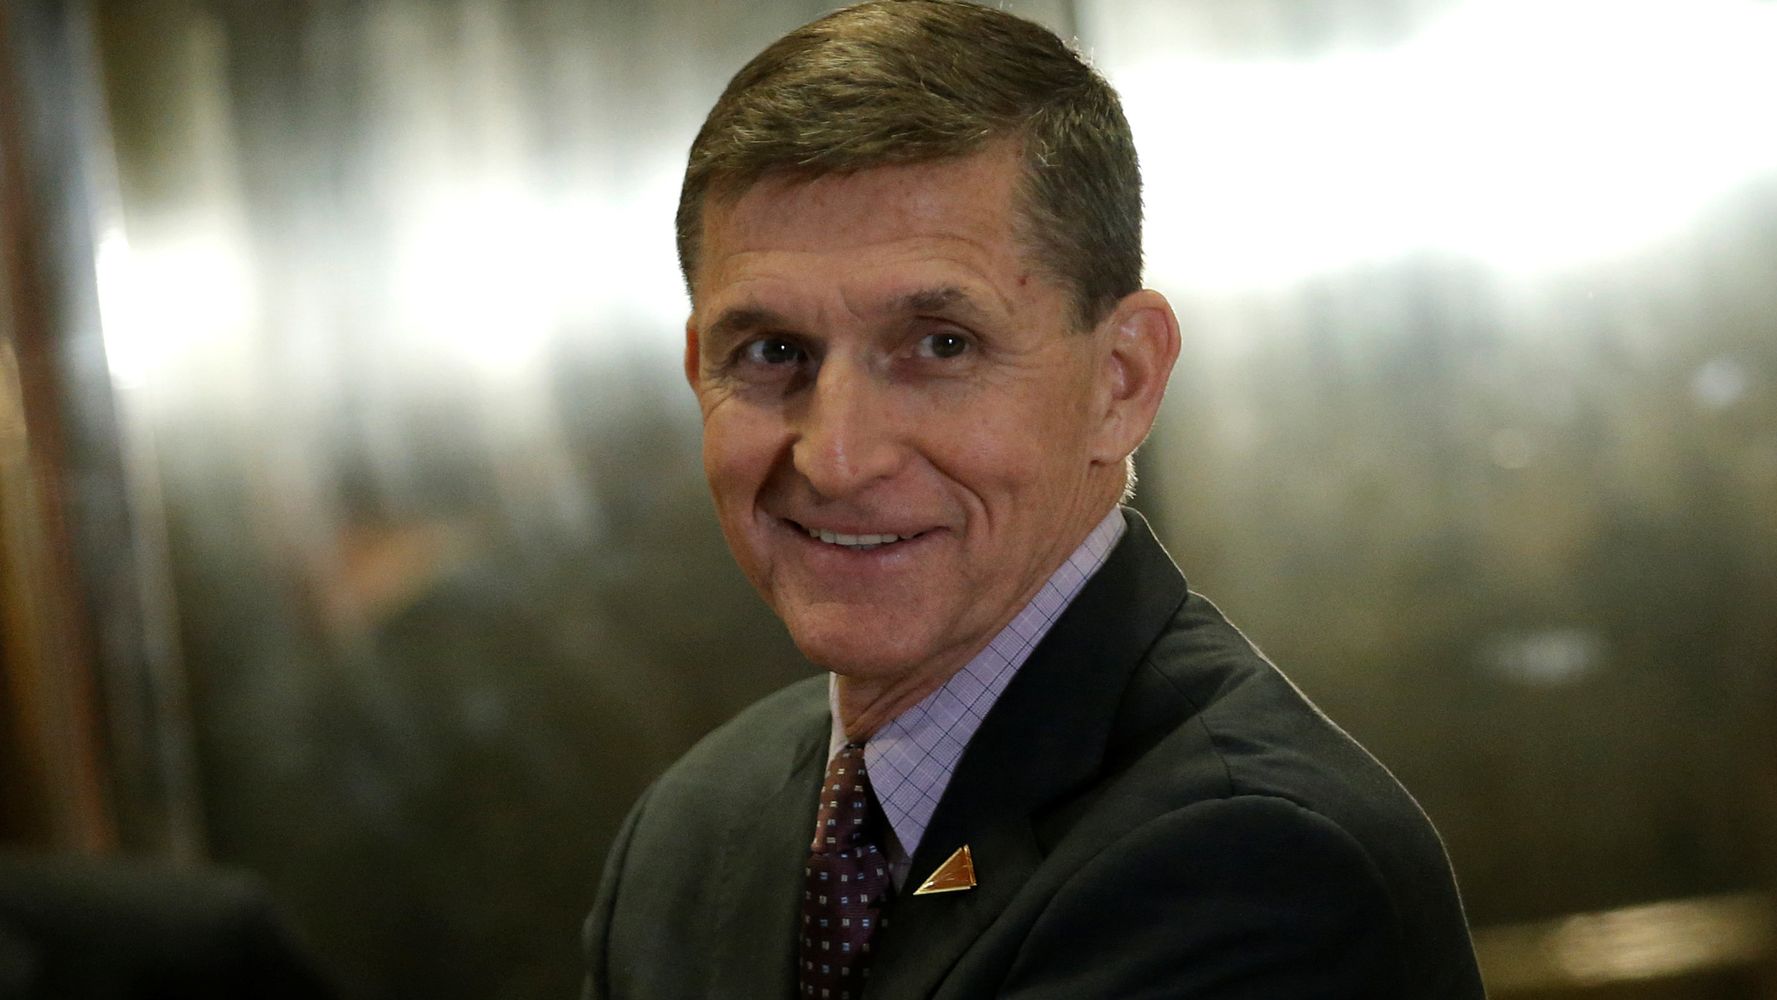 INTRIGUE: Flynn Having 'Frequent Contacts' With Russian Ambassado...